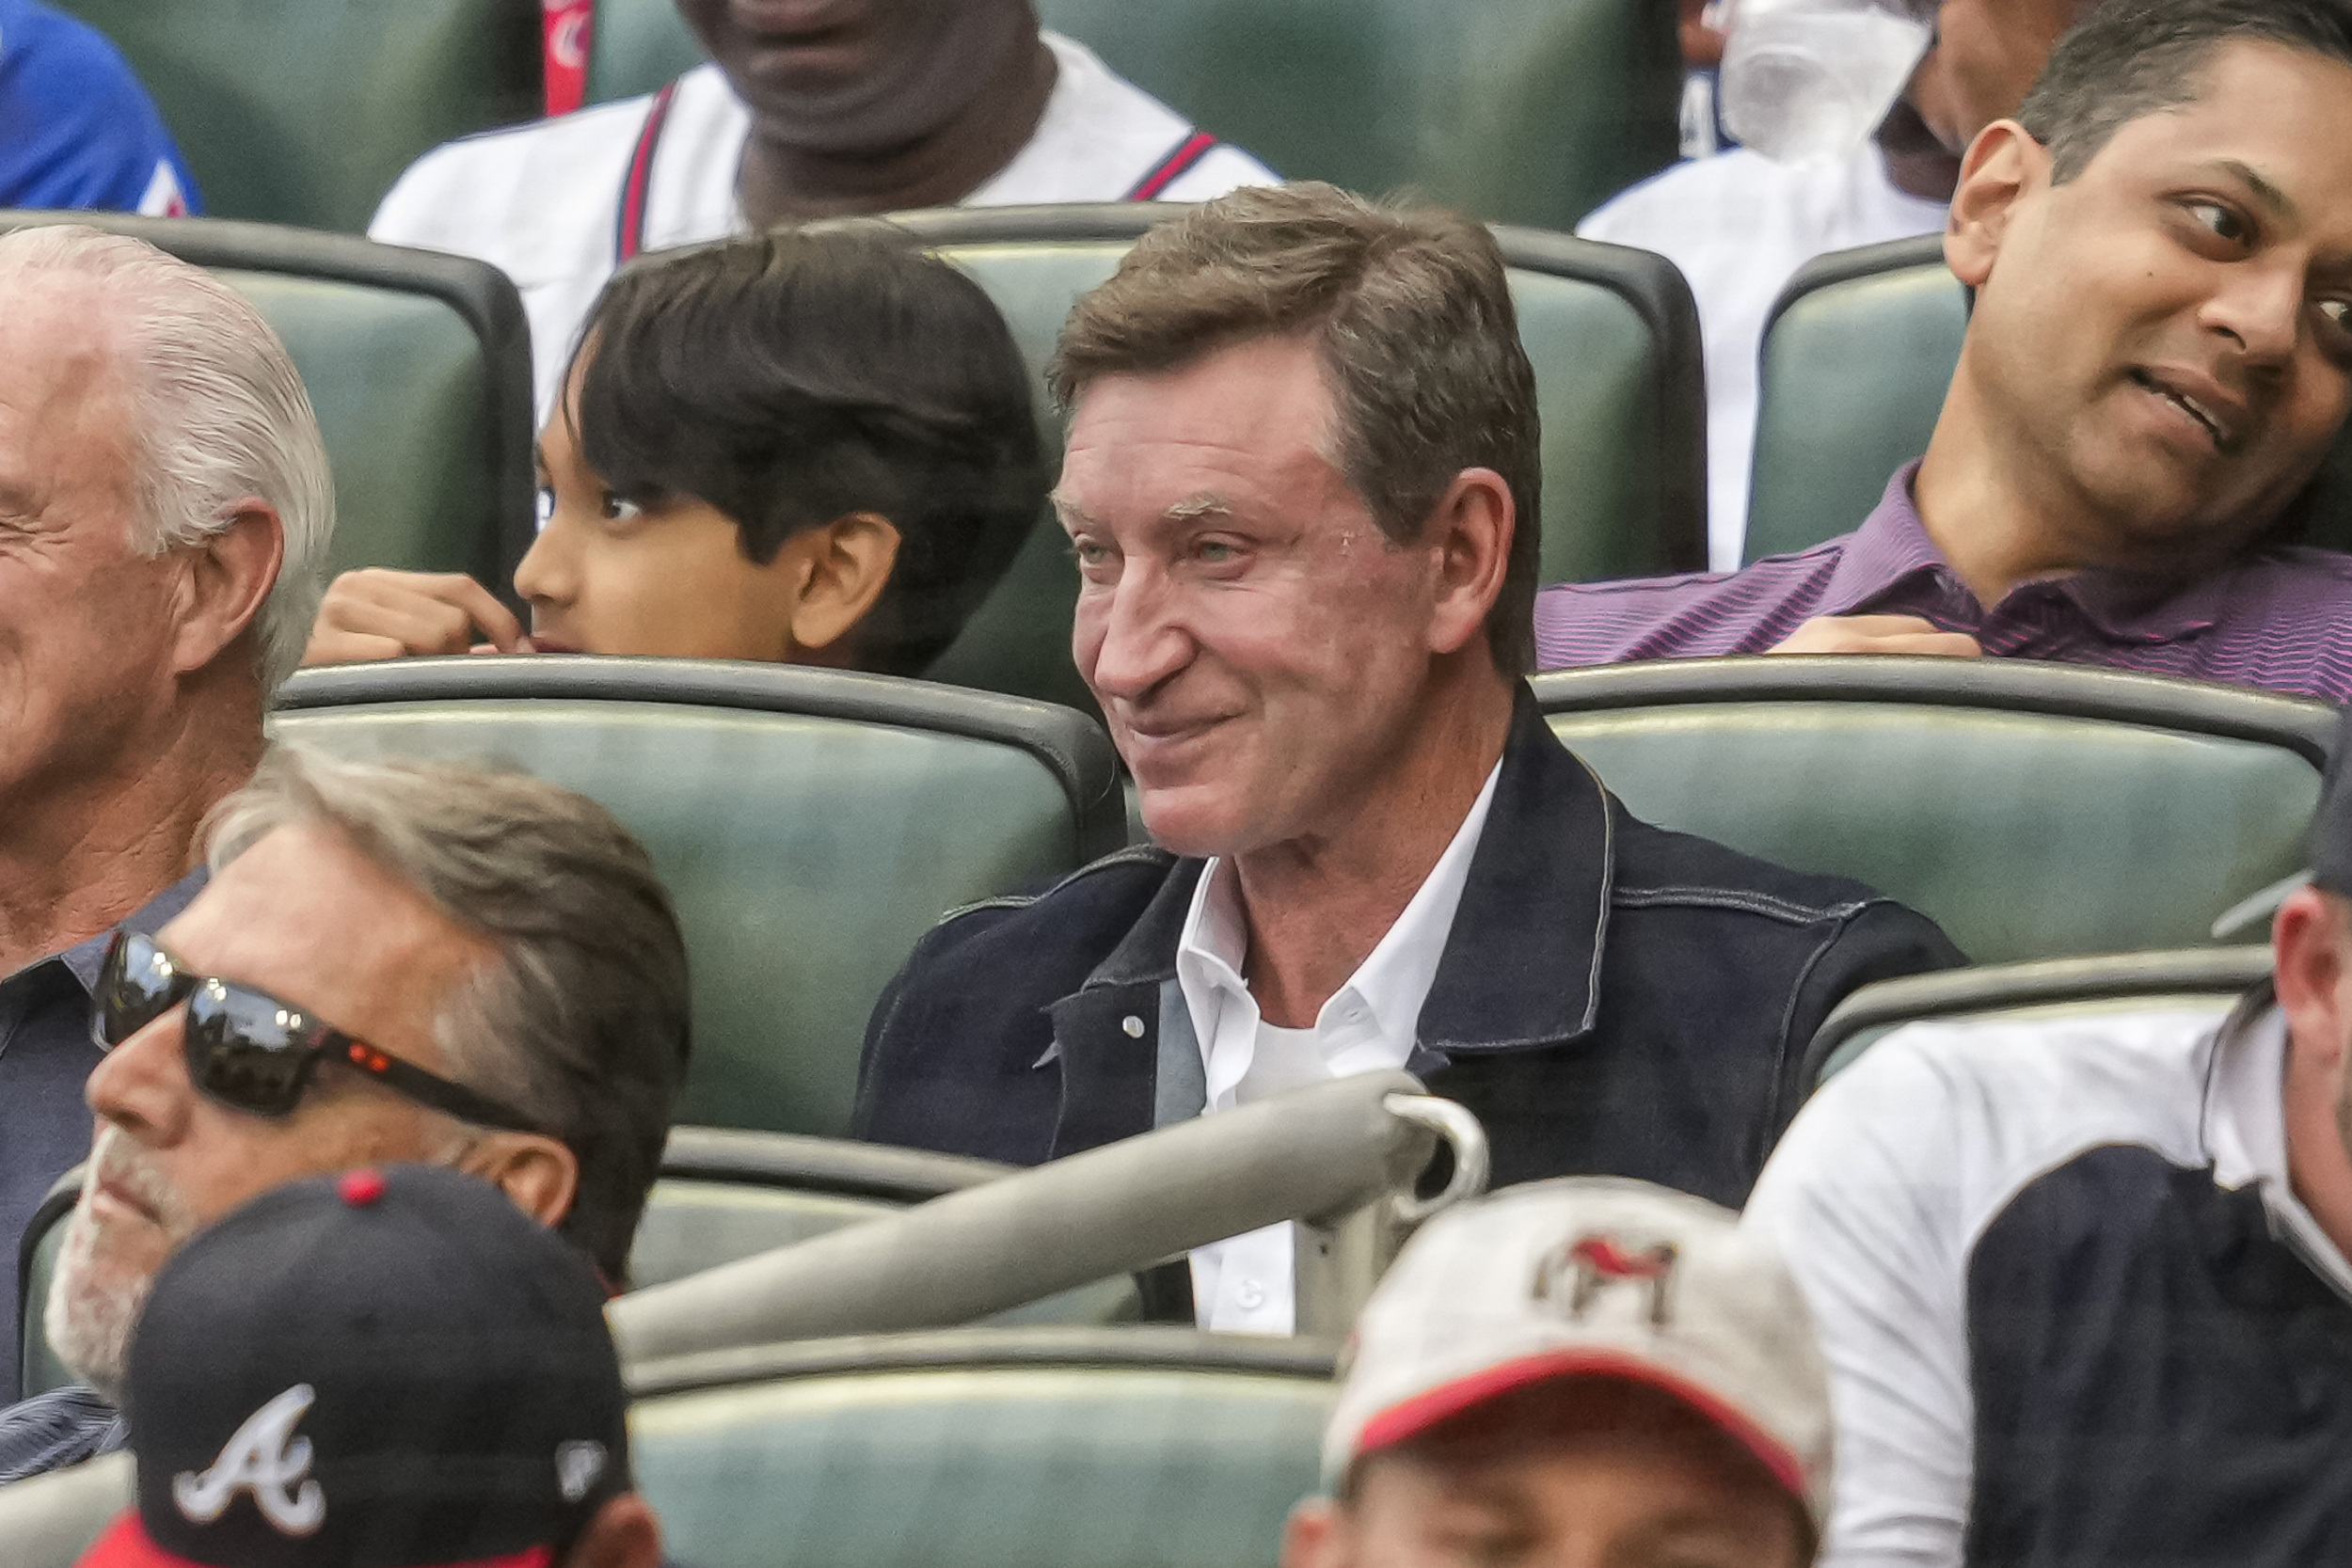 Wayne Gretzky opens up on his new role in Oilers front office